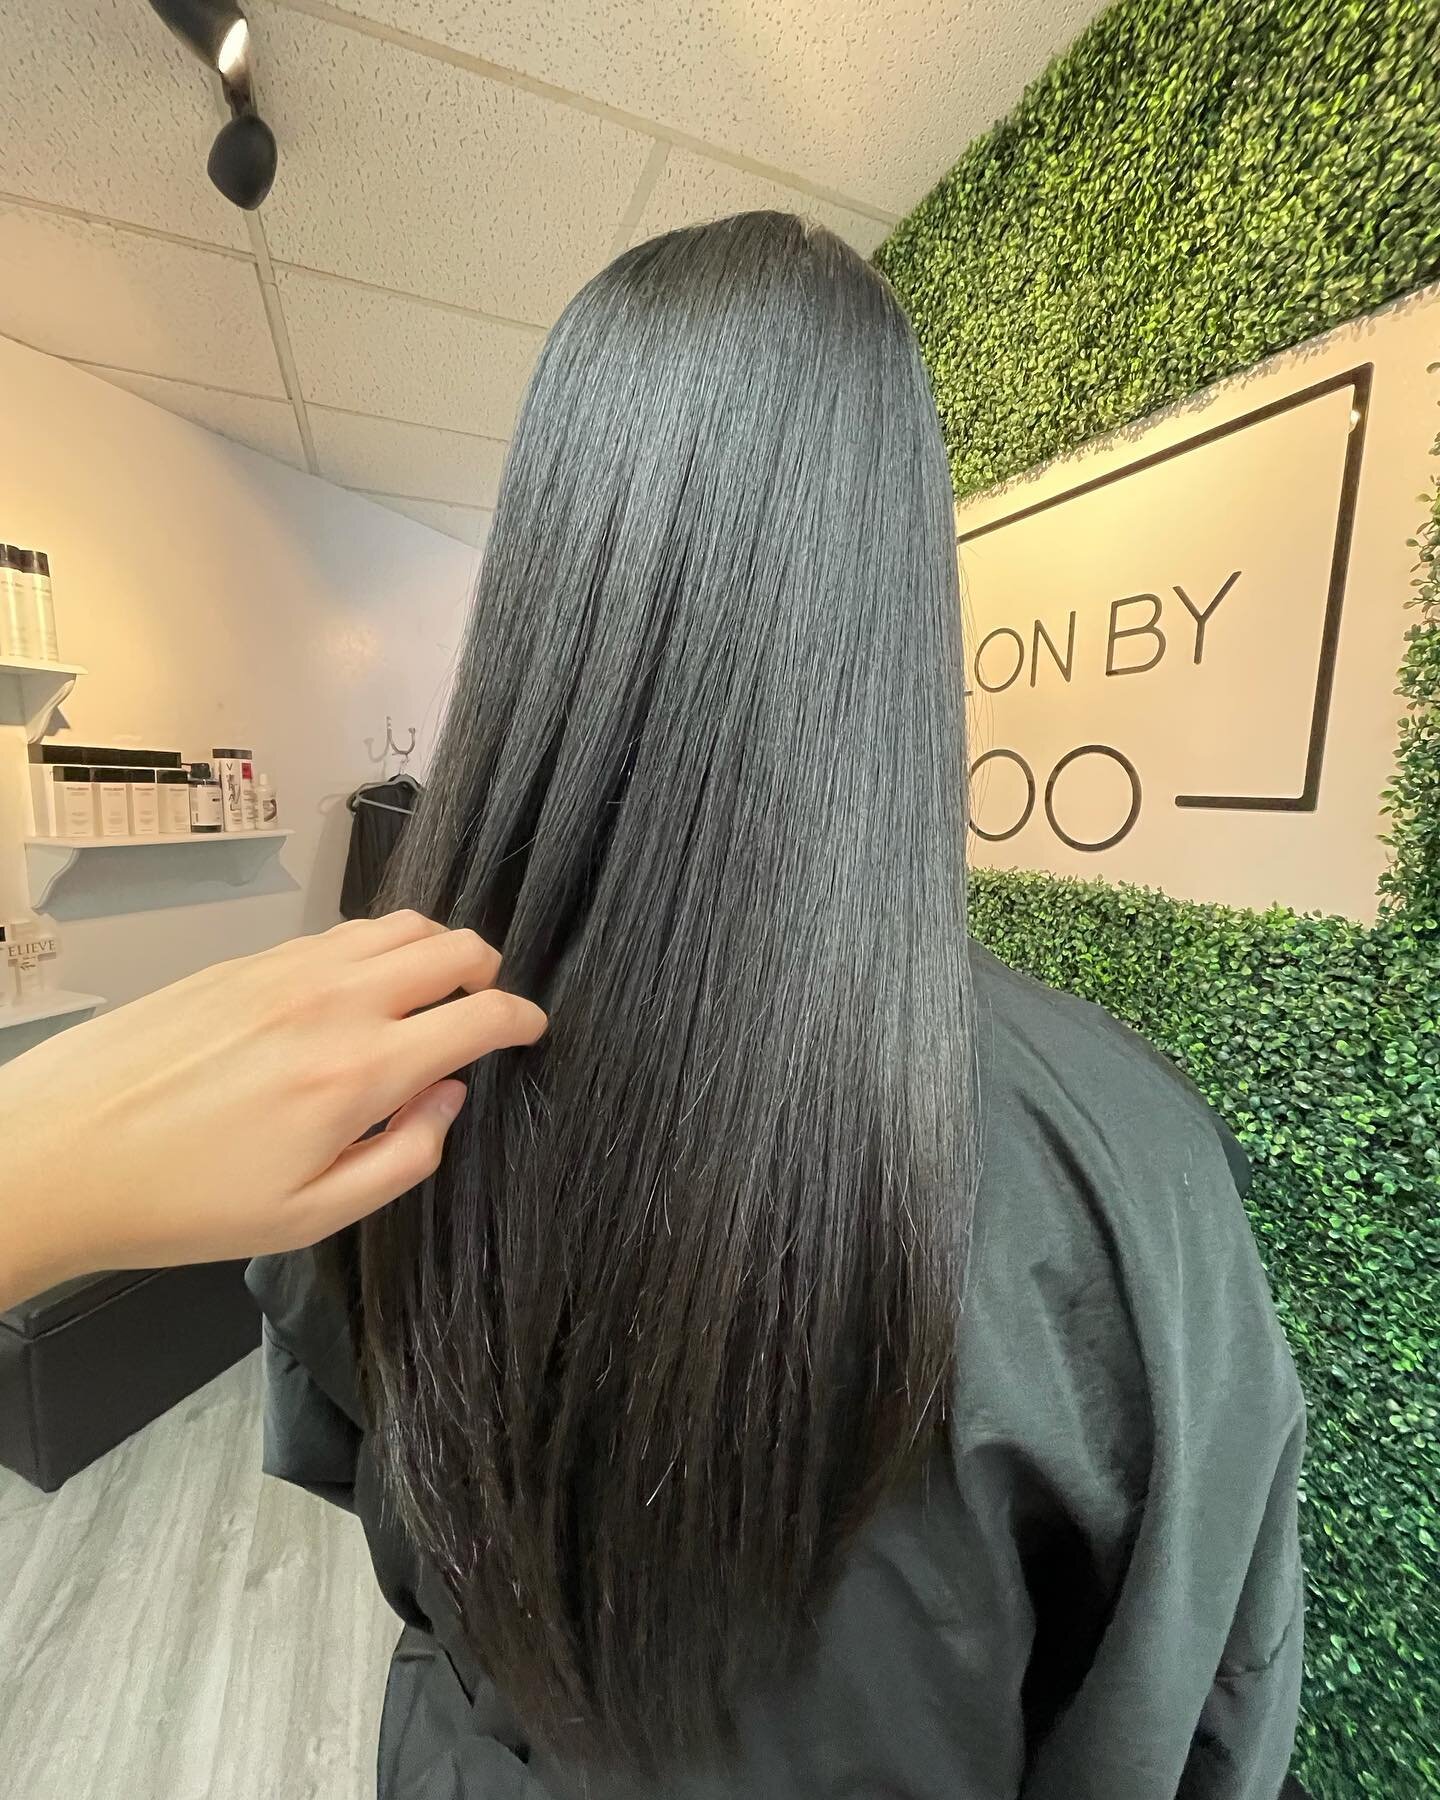 Straight perm or Keratin treatment? 

#salonbyyoo #onlyou

For customer satisfaction, a 1:1 consultation will be performed before any service.

For appointment/consultation
DM / call at 8089551600
Email info@salonbyyoo.com
Www.salonbyyoo.com

고객님의 보다